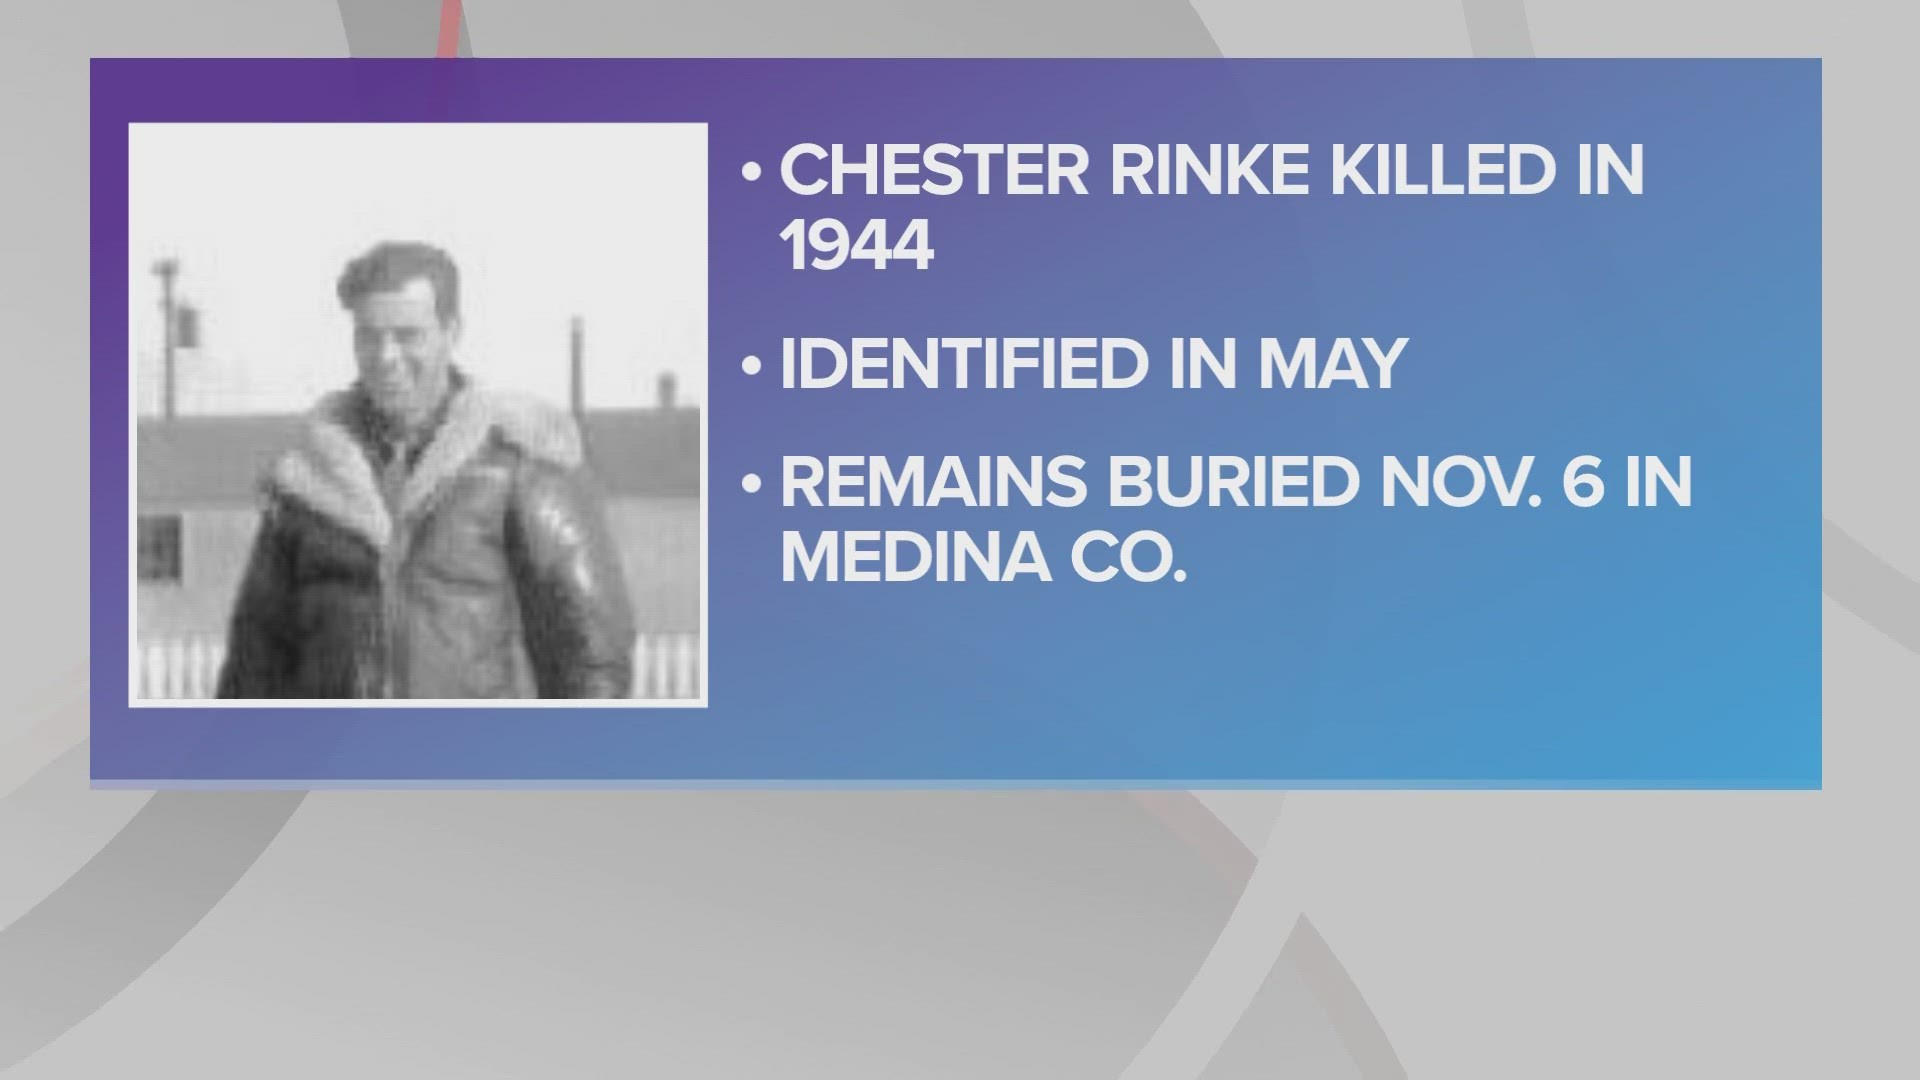 Chester Rinke was killed during World War II on June 26, 1944. His remains were identified on May 5, 2023.